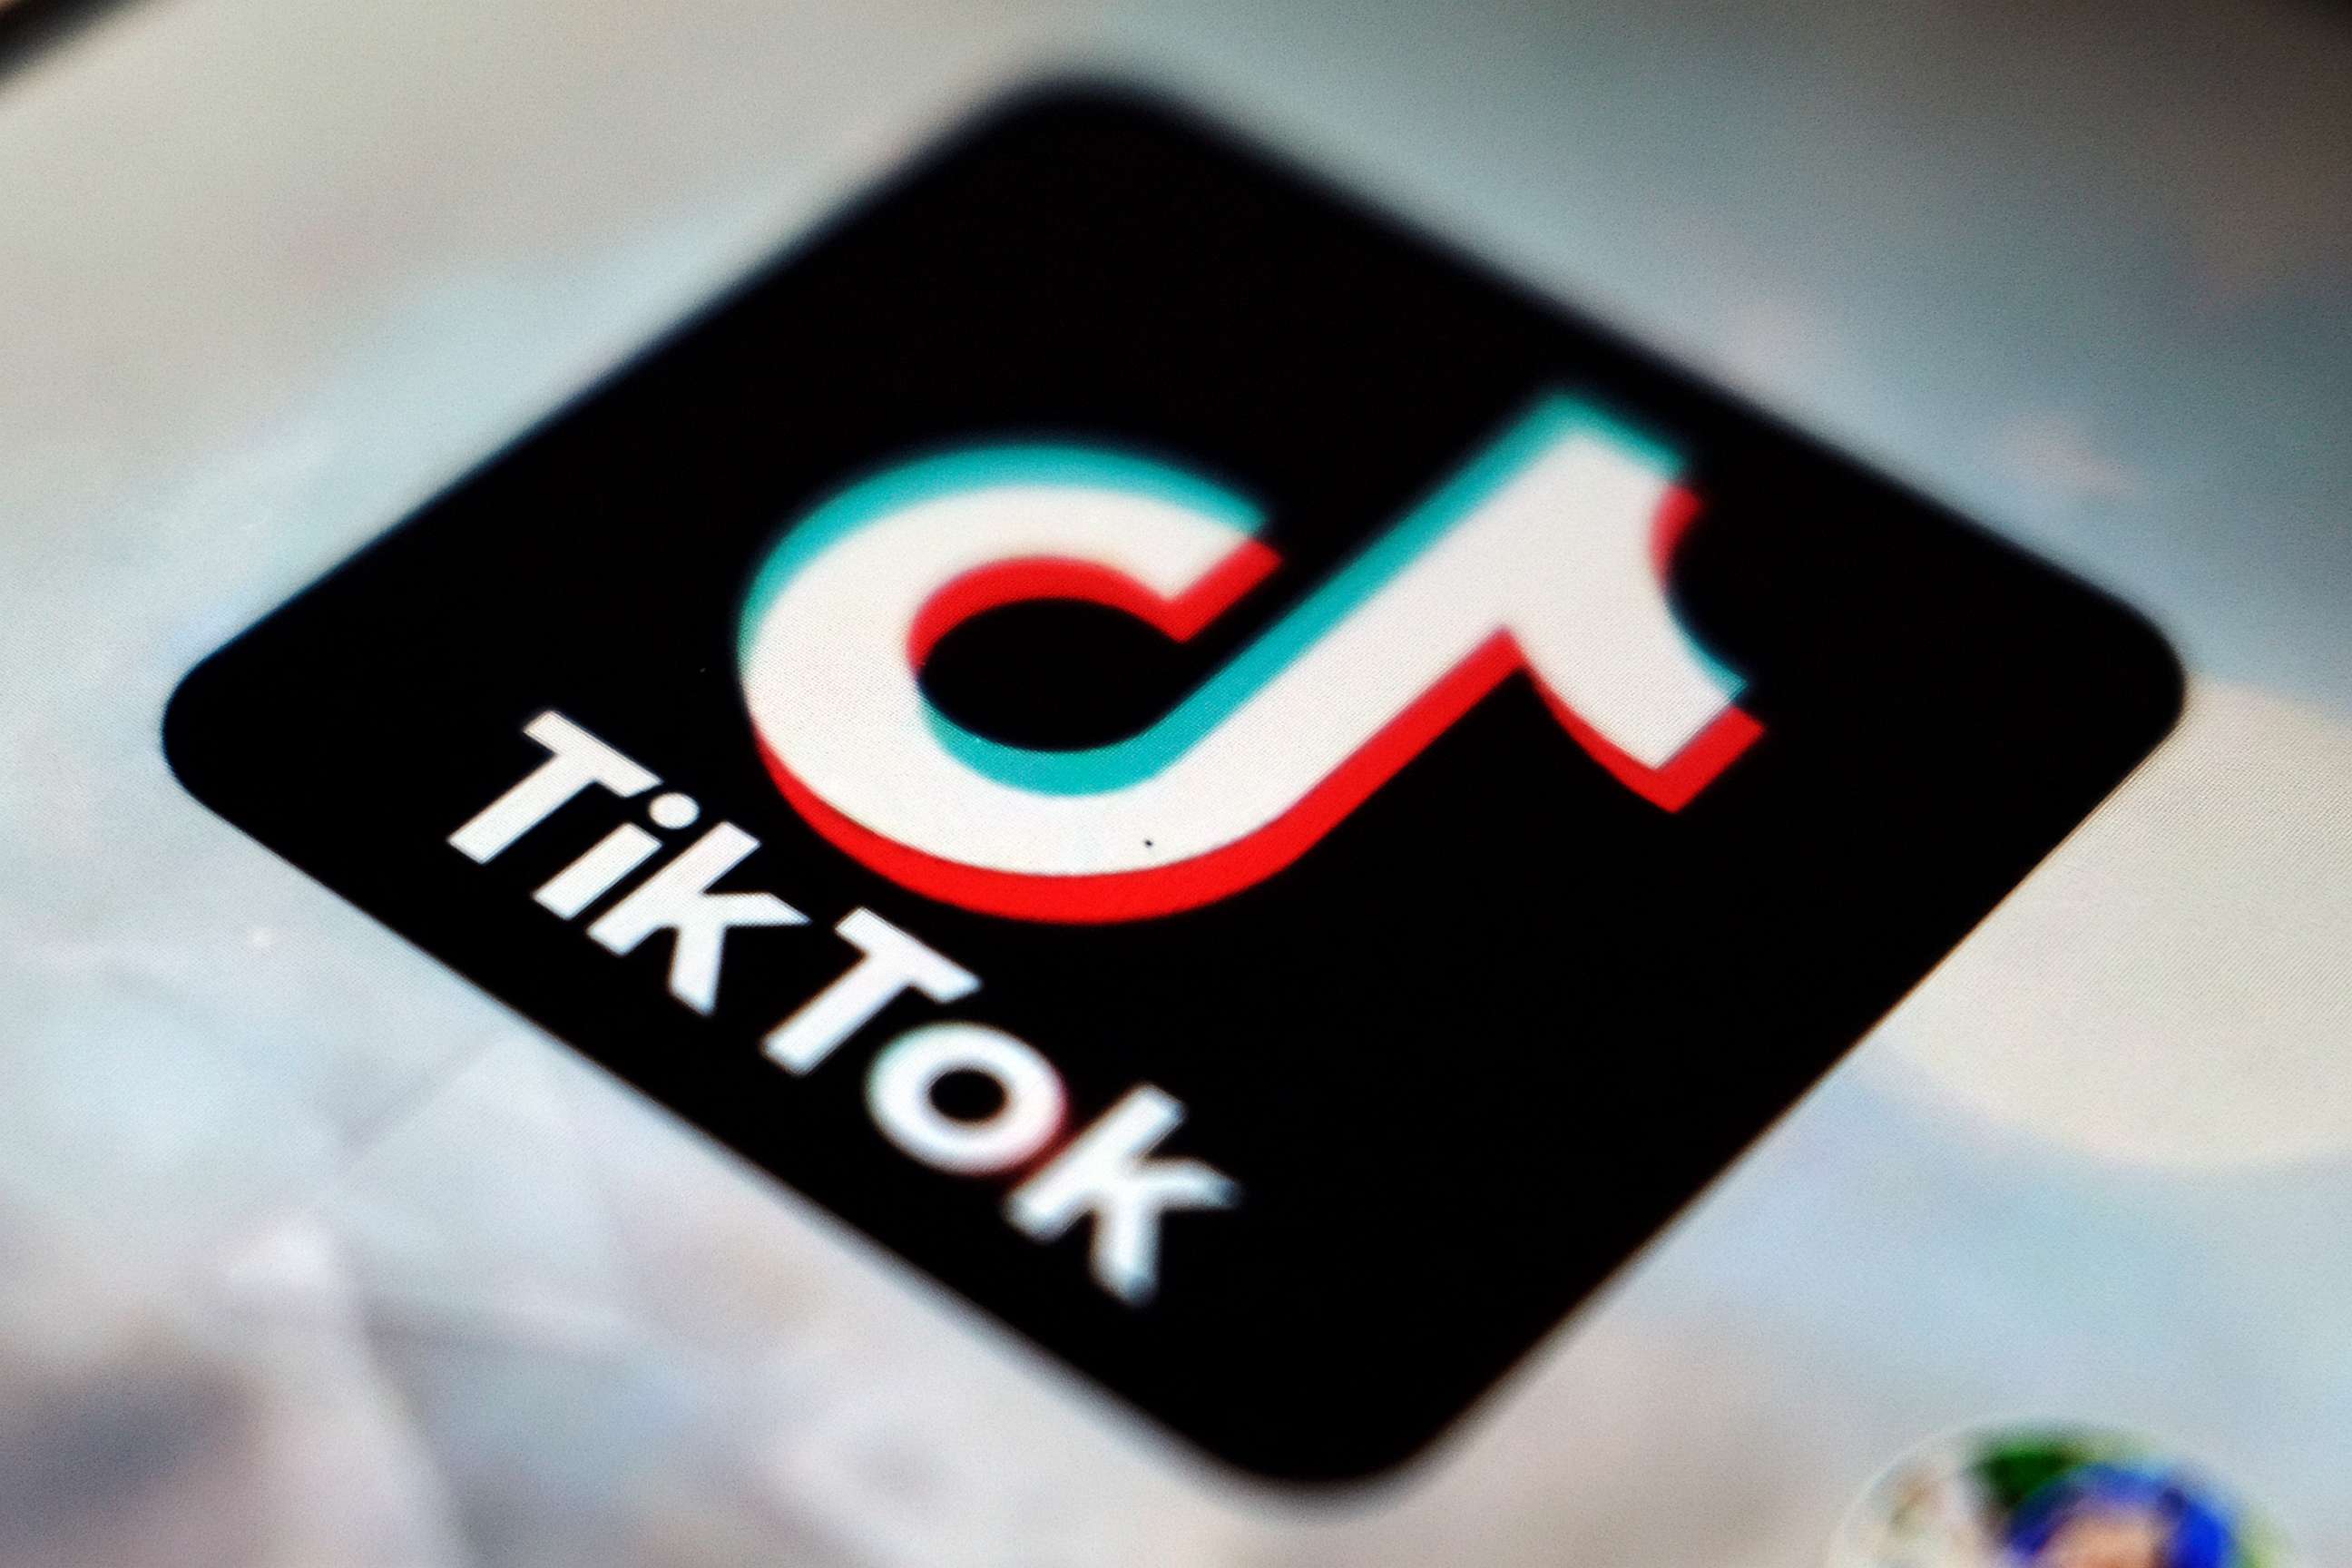 TikTok Introduces Text-Only Posts - The New York Times